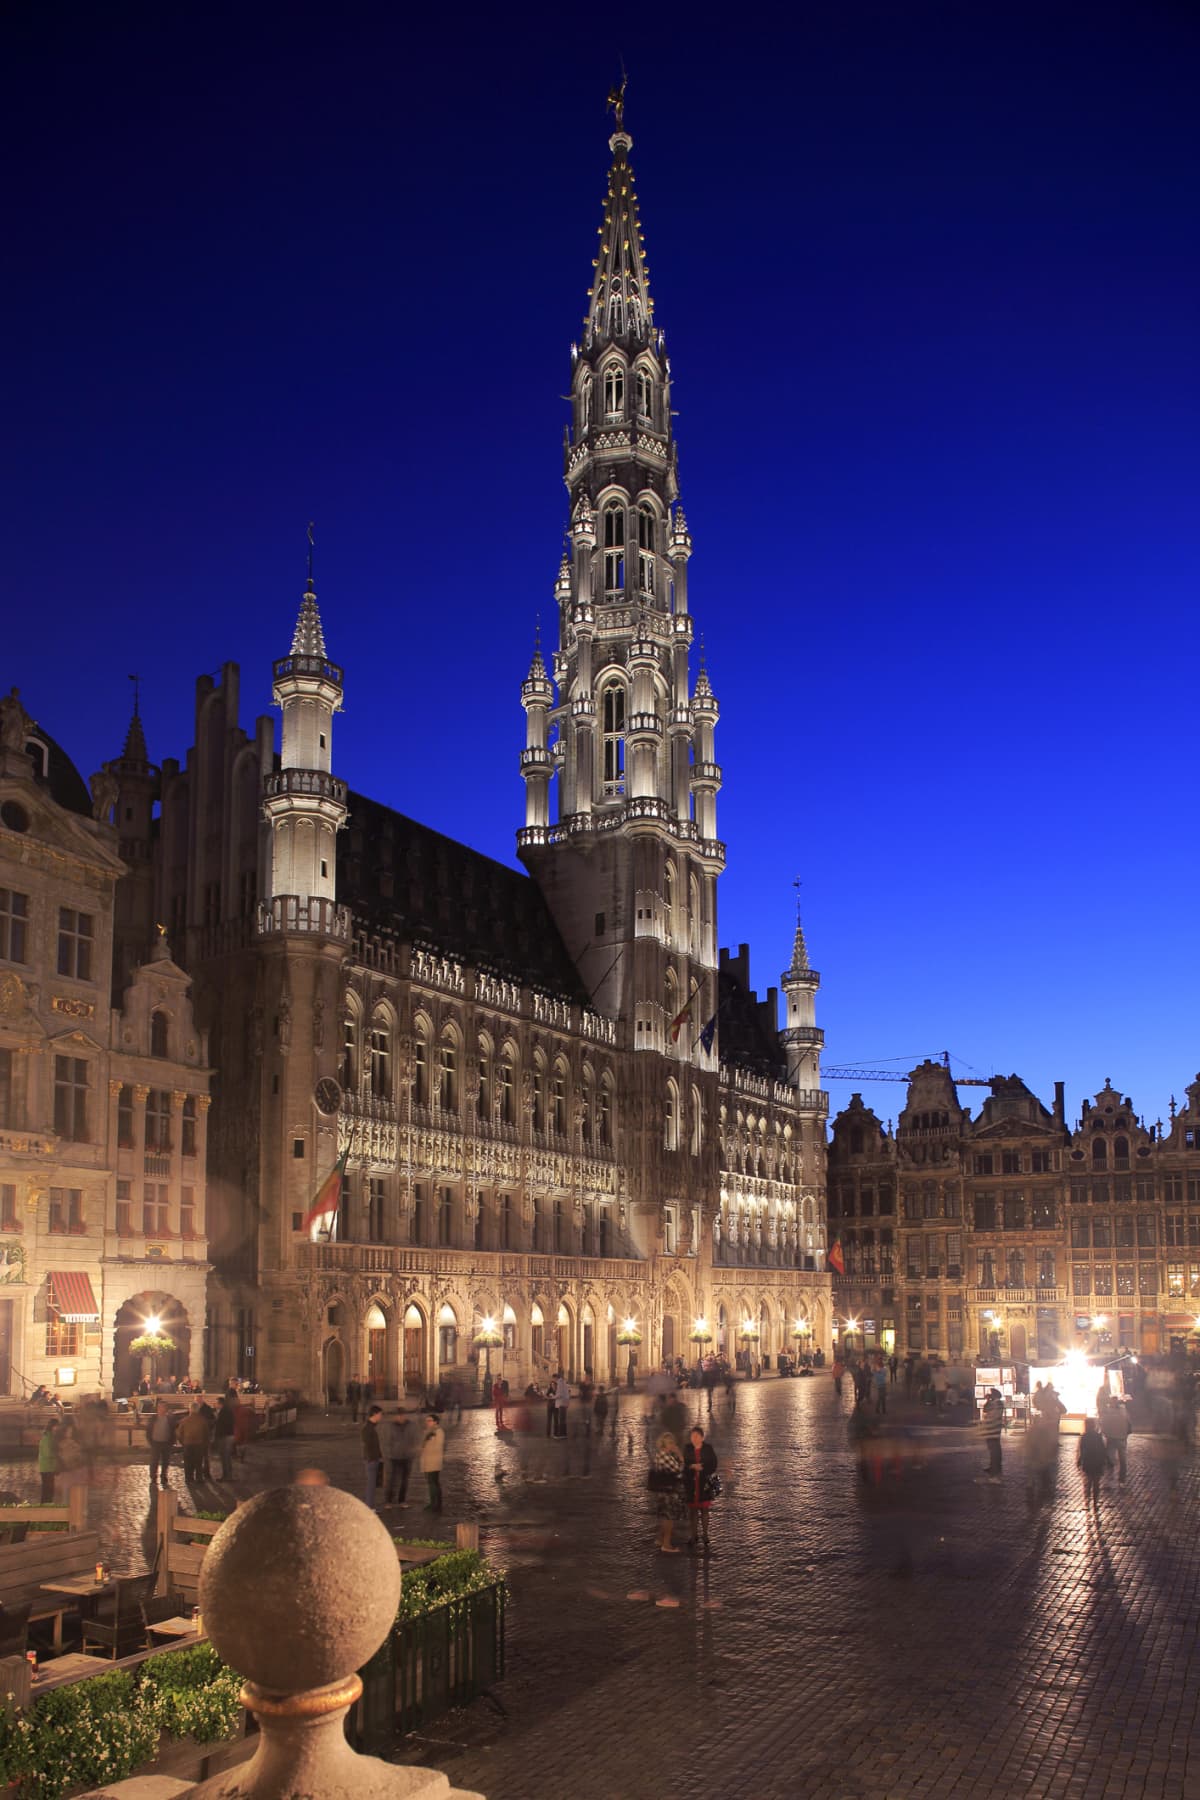 Grand Palace in Brussels, Belgium at night